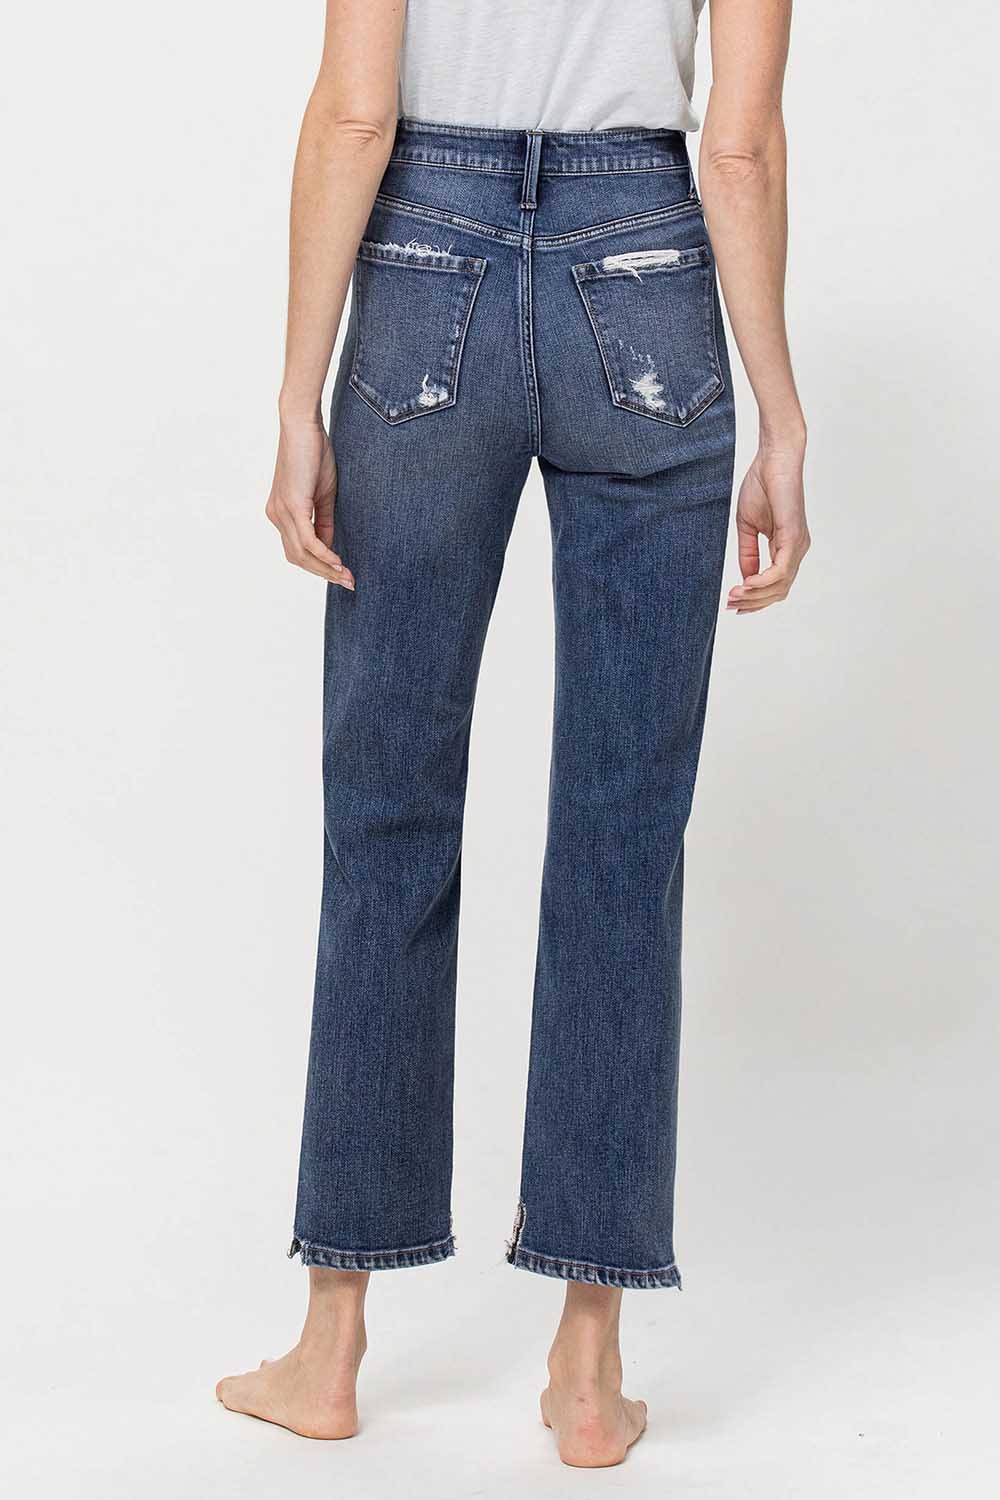 flying-monkey-jeans-high-rise-ankle-straight-jeans-04